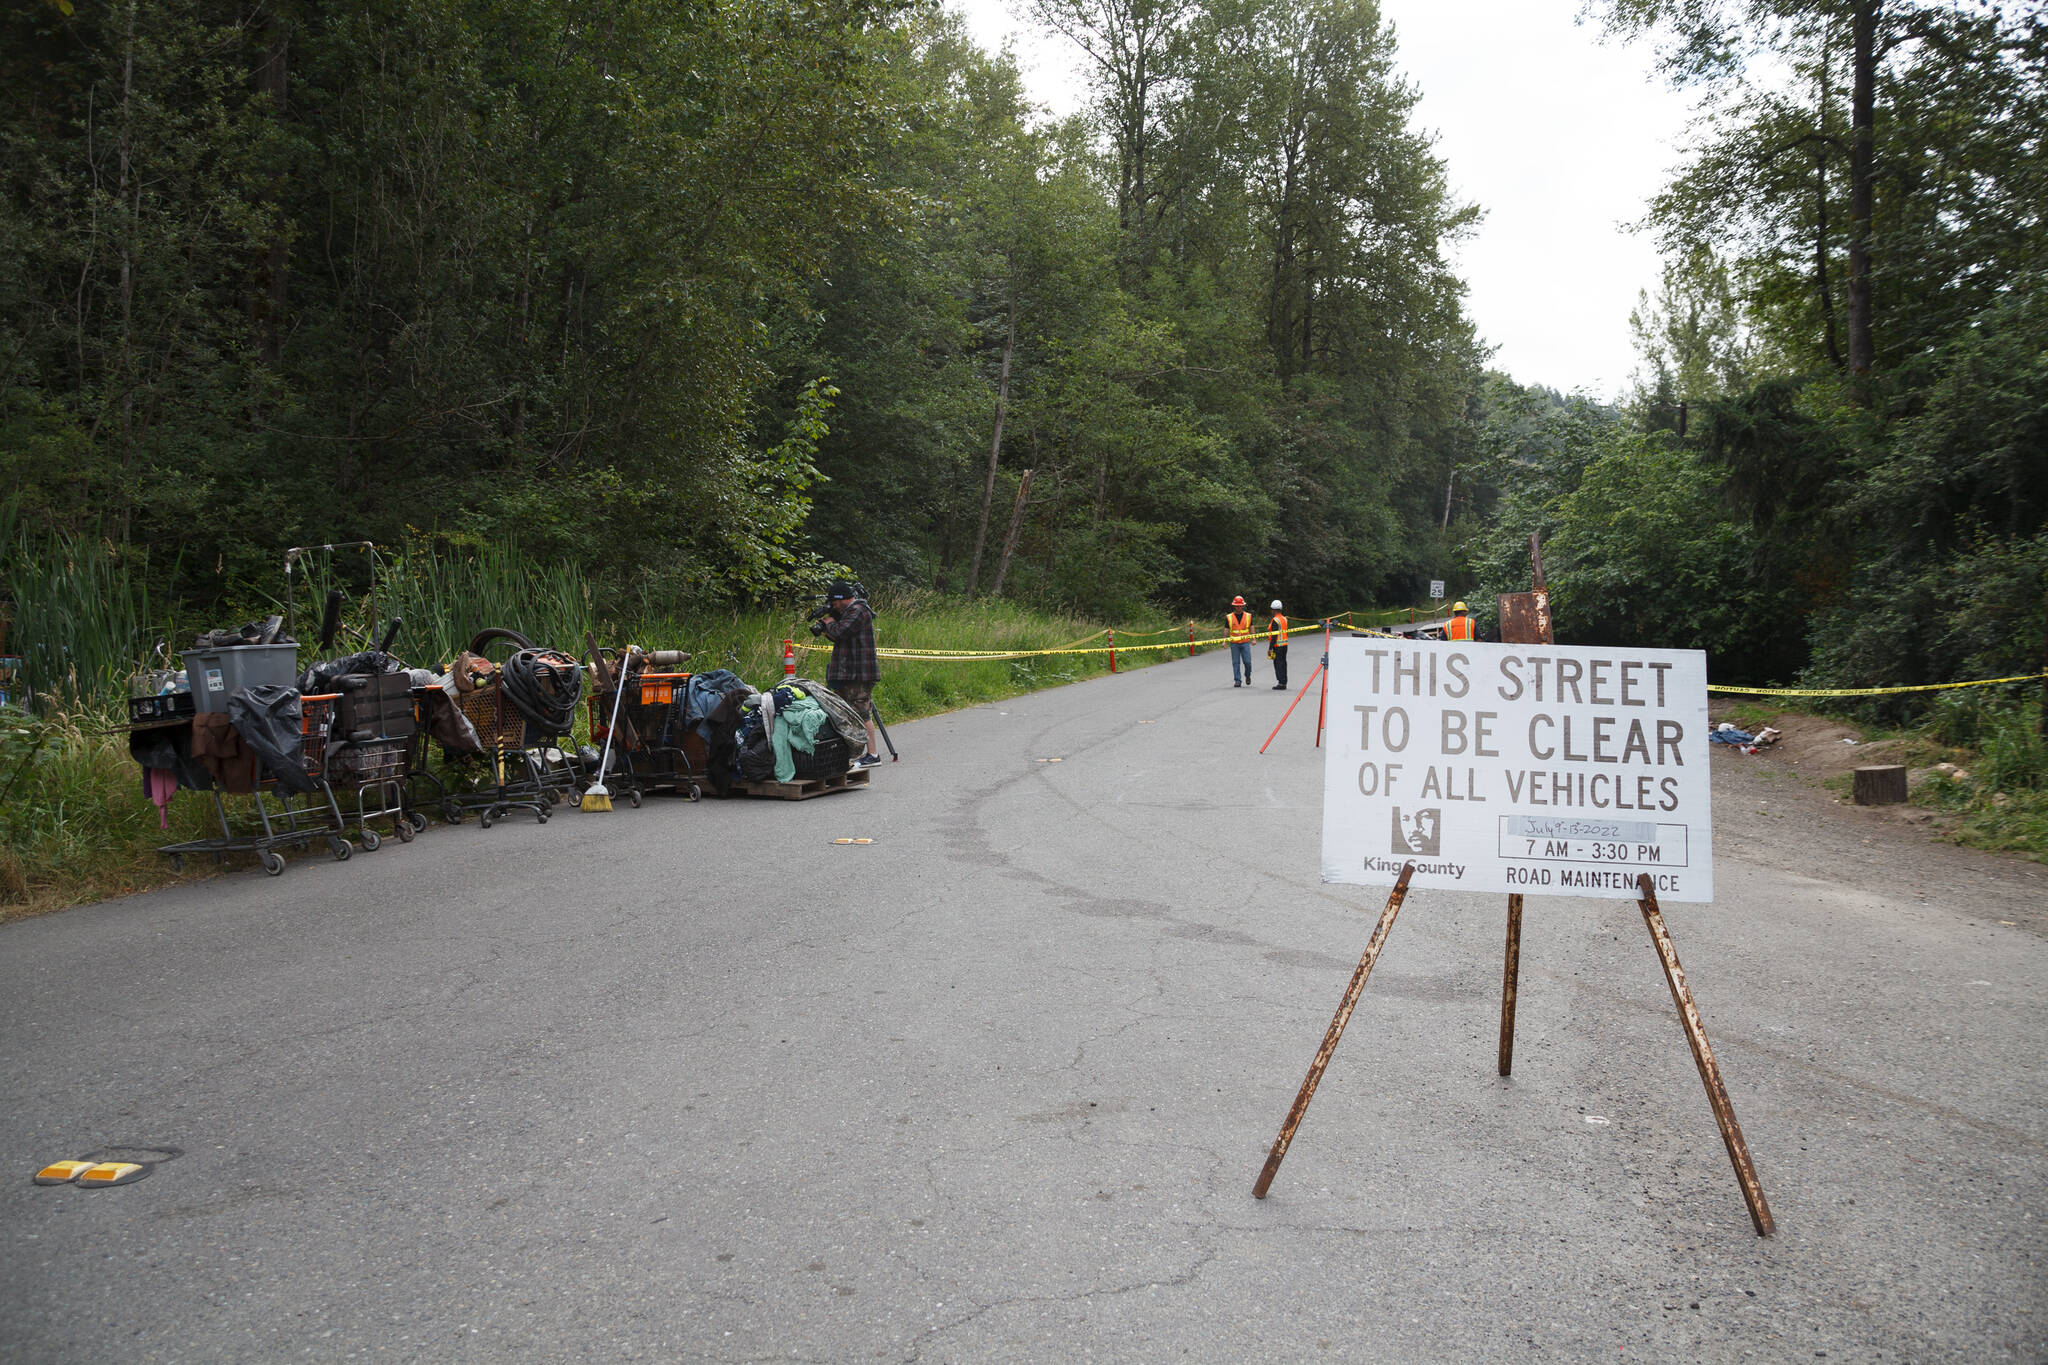 County workers cleaned trash and debris July 13 from homeless encampments and illegal dumping along the Green River Road in unincorporated King County between Kent and Auburn. HENRY STEWART-WOOD, Sound Publishing